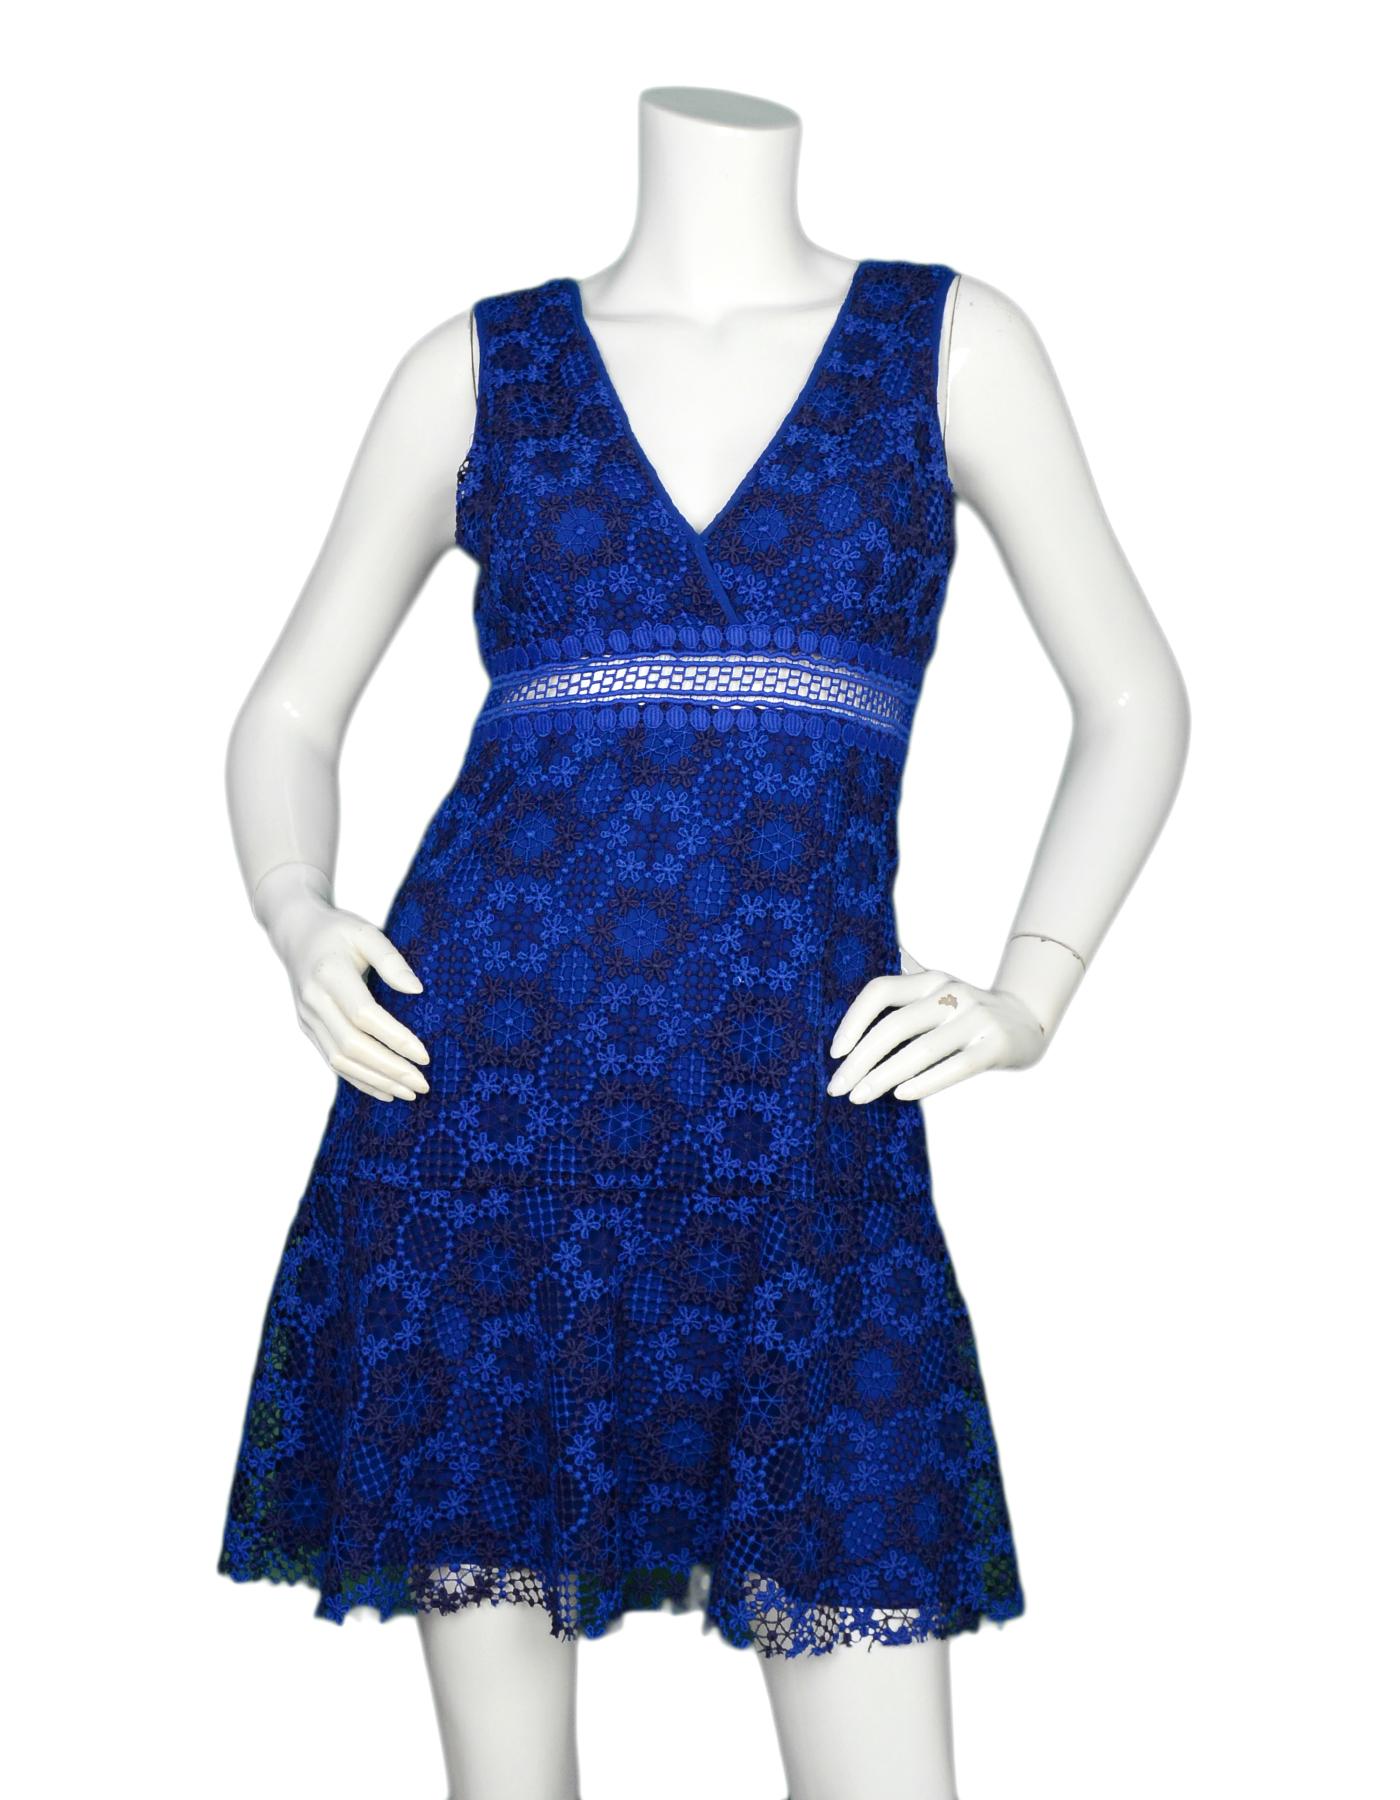 Sandro Blue Embroidery Lace V-Neck Sleeveless Dress Sz 6

Made In: Tunisia
Color: Blue
Materials: 100% polyester
Lining: 100% polyester
Opening/Closure: Hidden side zipper with hook eye at top
Overall Condition: Very good pre-owned condition with